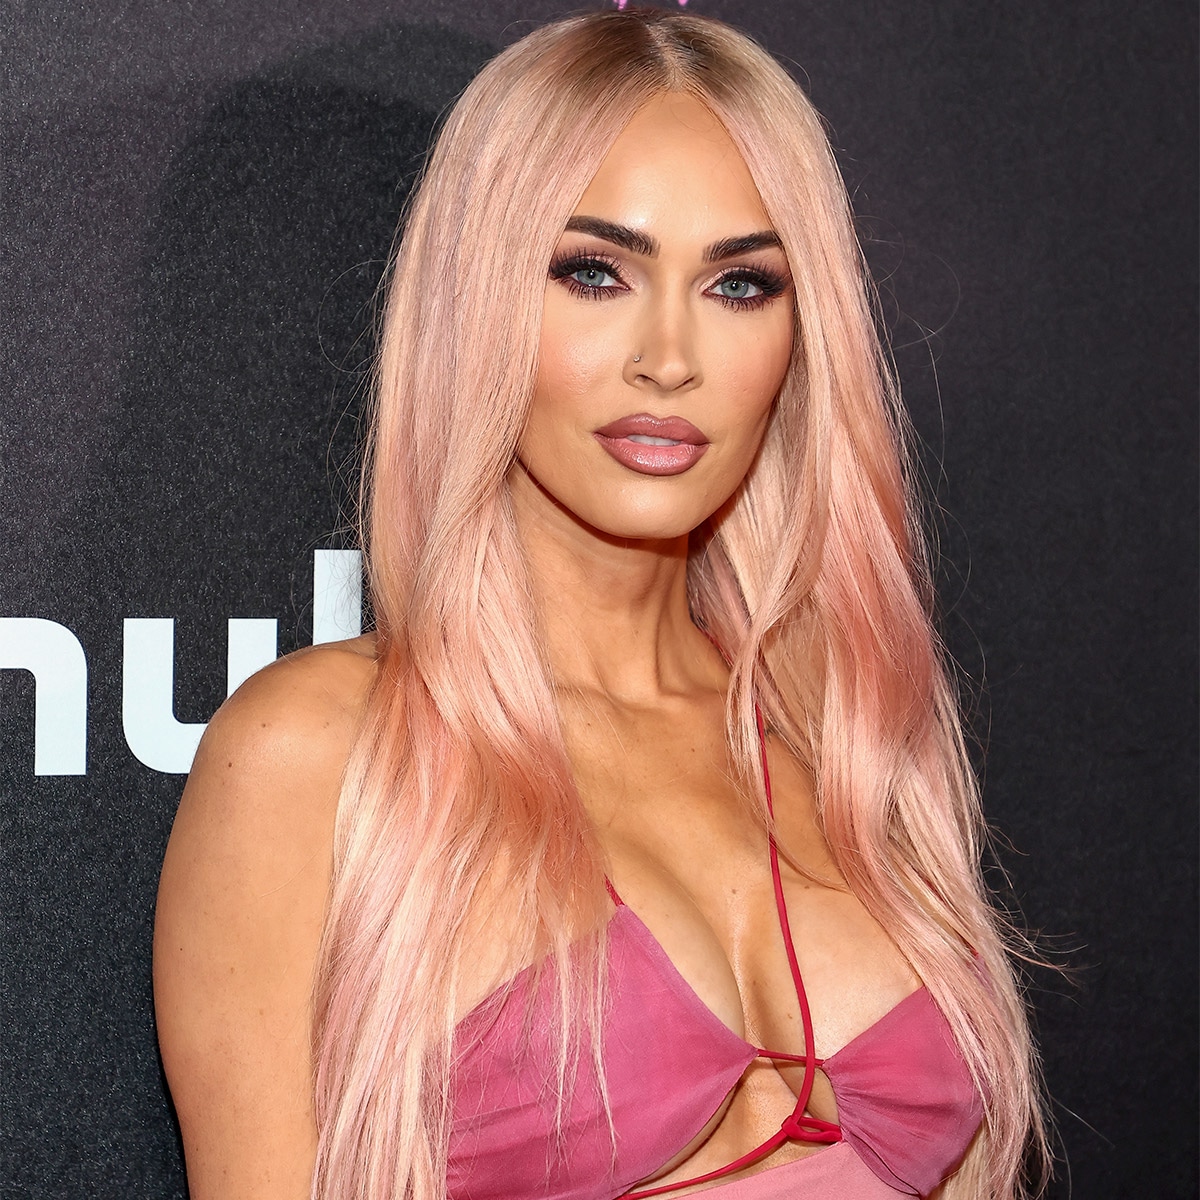 rs_1200x1200-220627171726-1200-megan-fox-pink-blonde-GettyImages-1405508252.jpg?fit=around%7C1200:1200&output-quality=90&crop=1200:1200;center,top